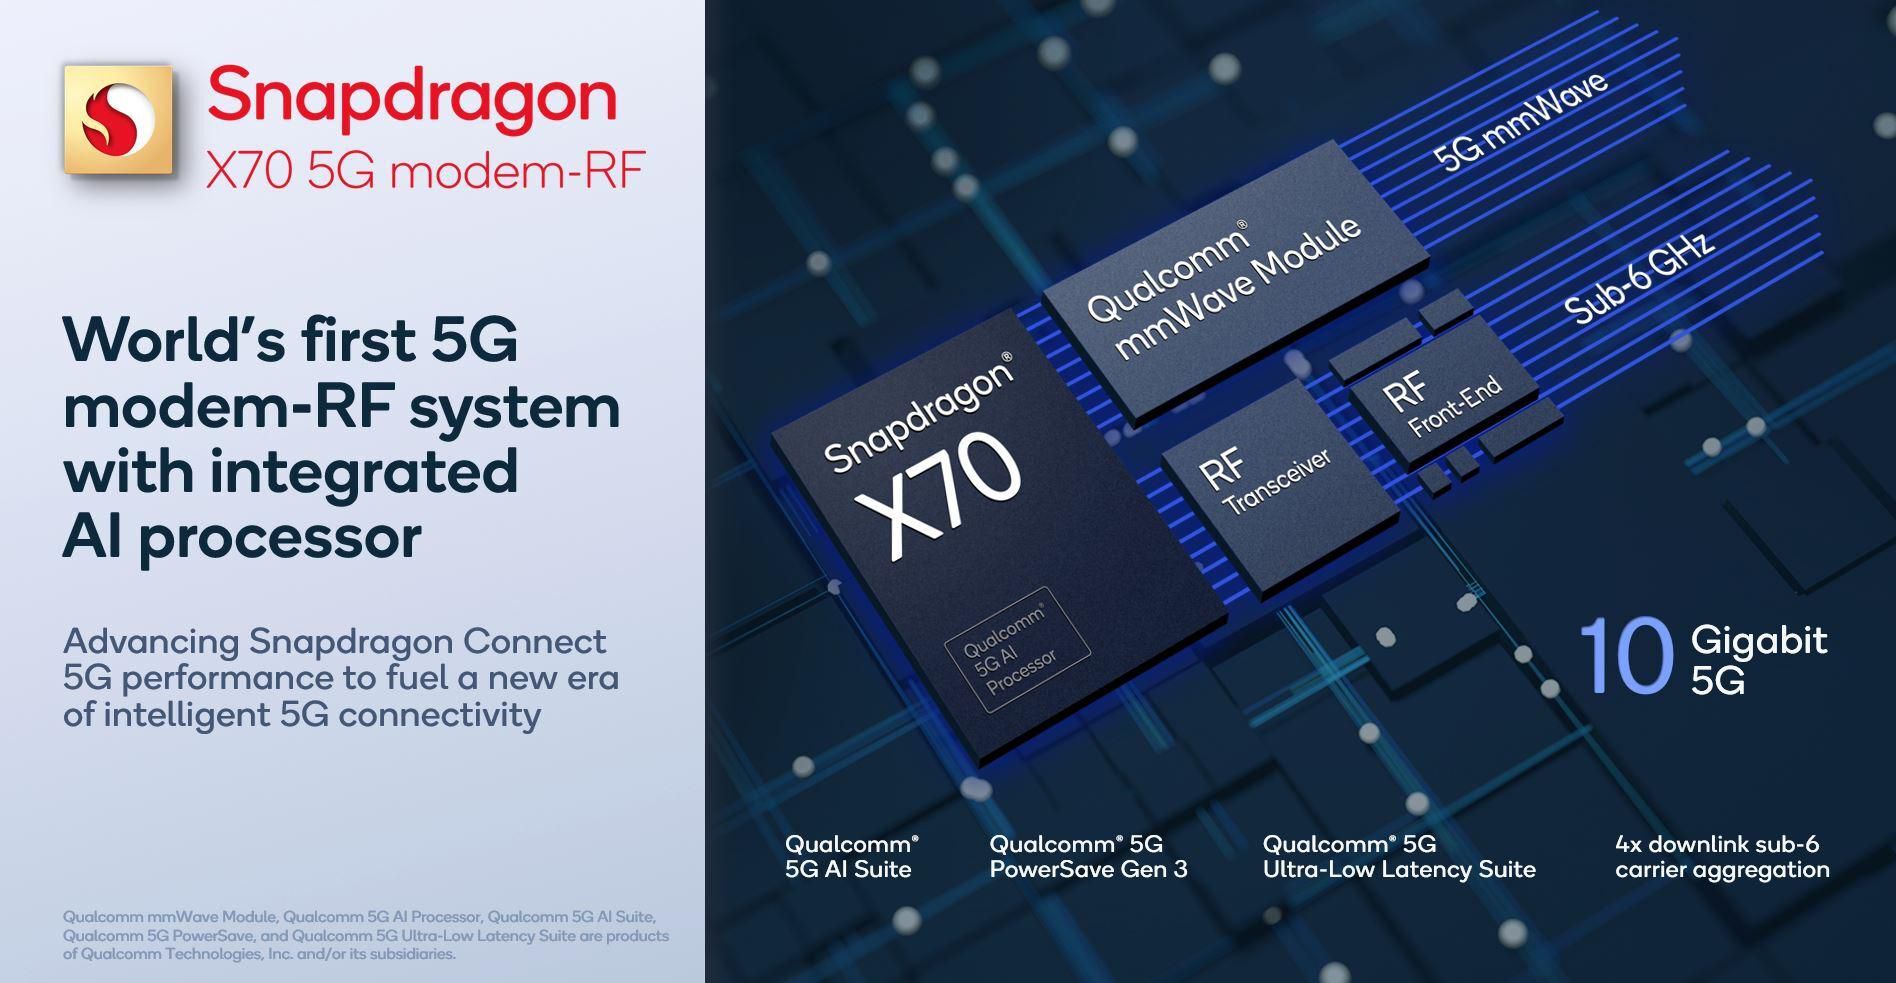 Apple's iPhone 15 series features Qualcomm's Snapdragon X70 5G modem - The stakes are high as Apple hopes to replace Qualcomm's iPhone 5G modem